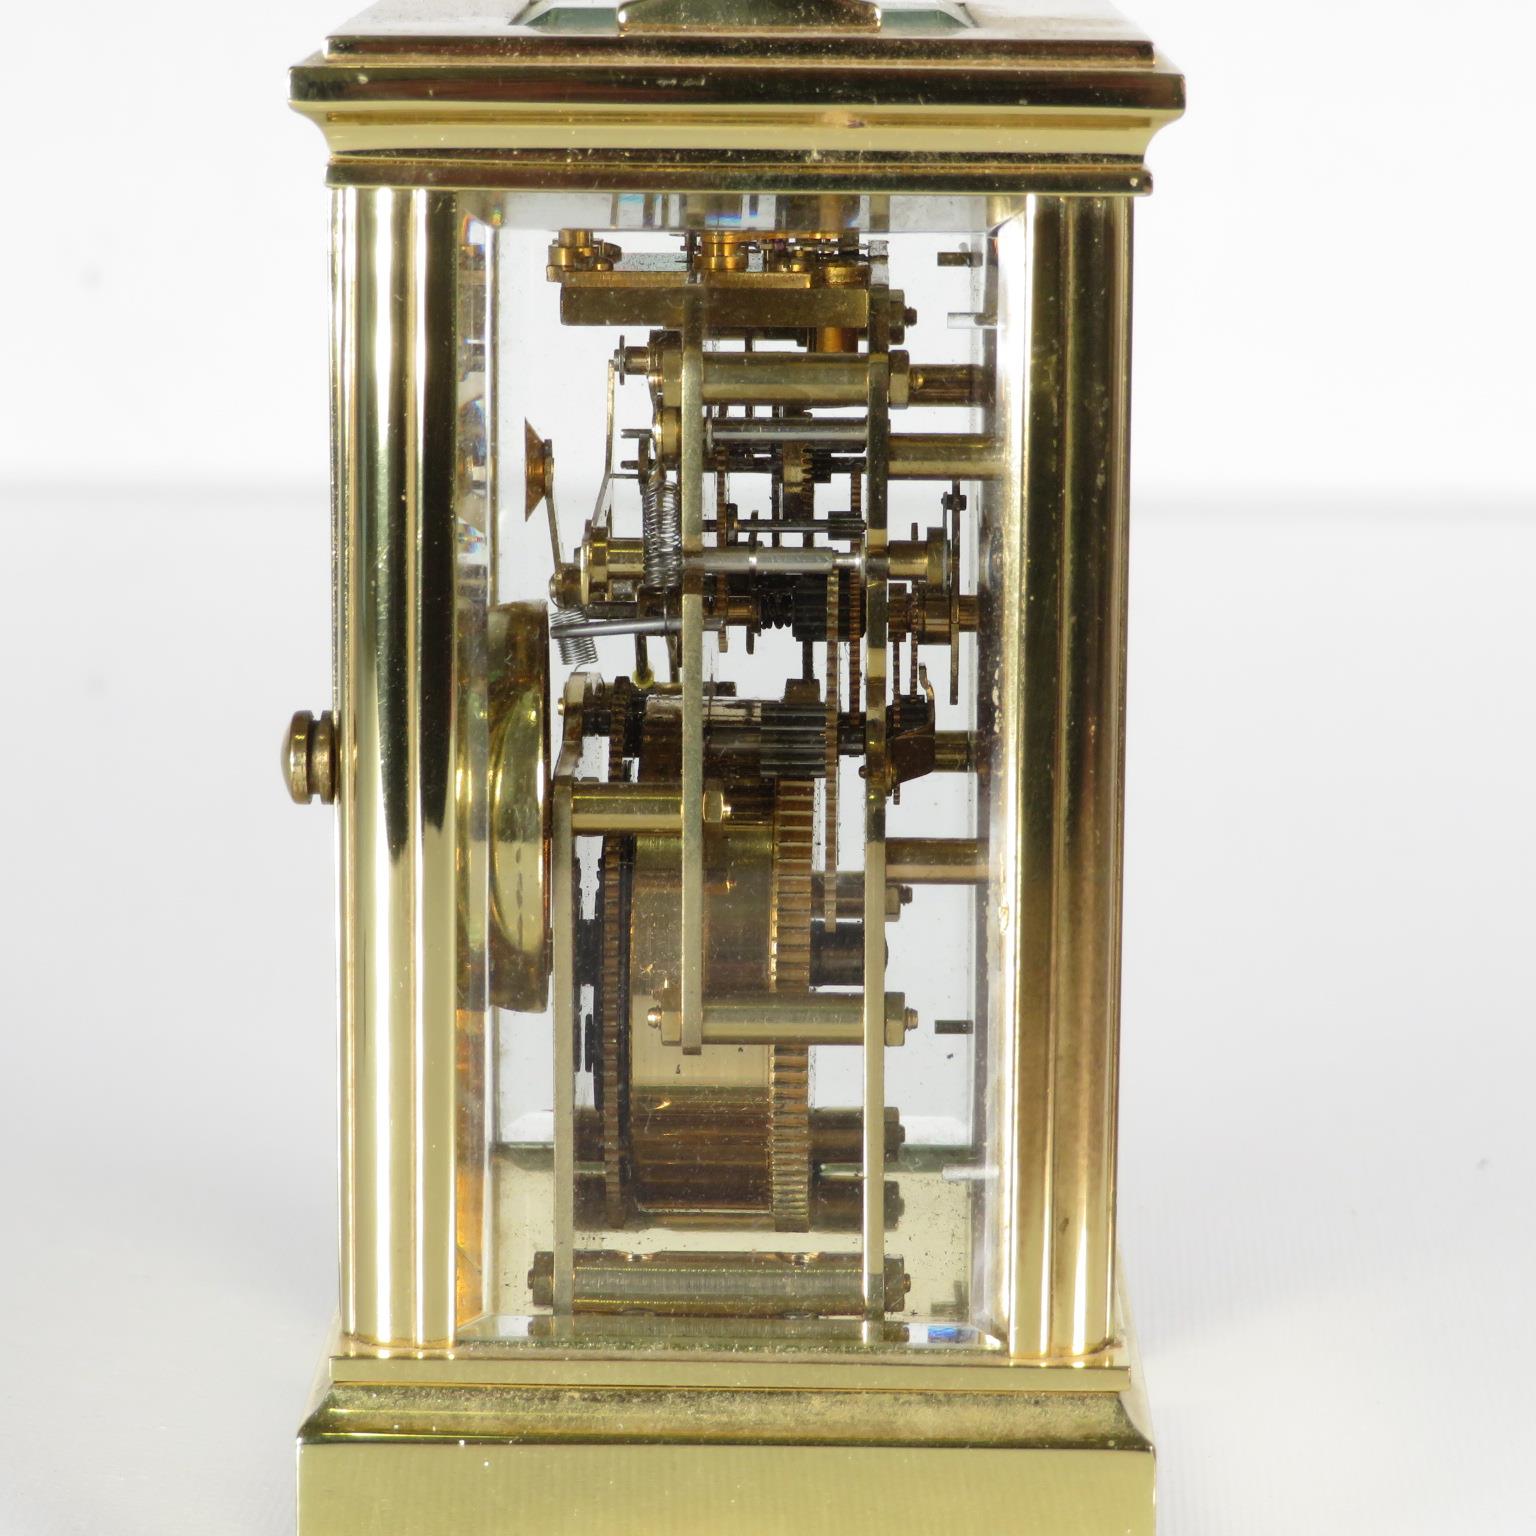 A Woodford midsized chiming carriage clock with 13 unadjusted jewel. 120mm x 80mm. Fully running // - Image 5 of 6